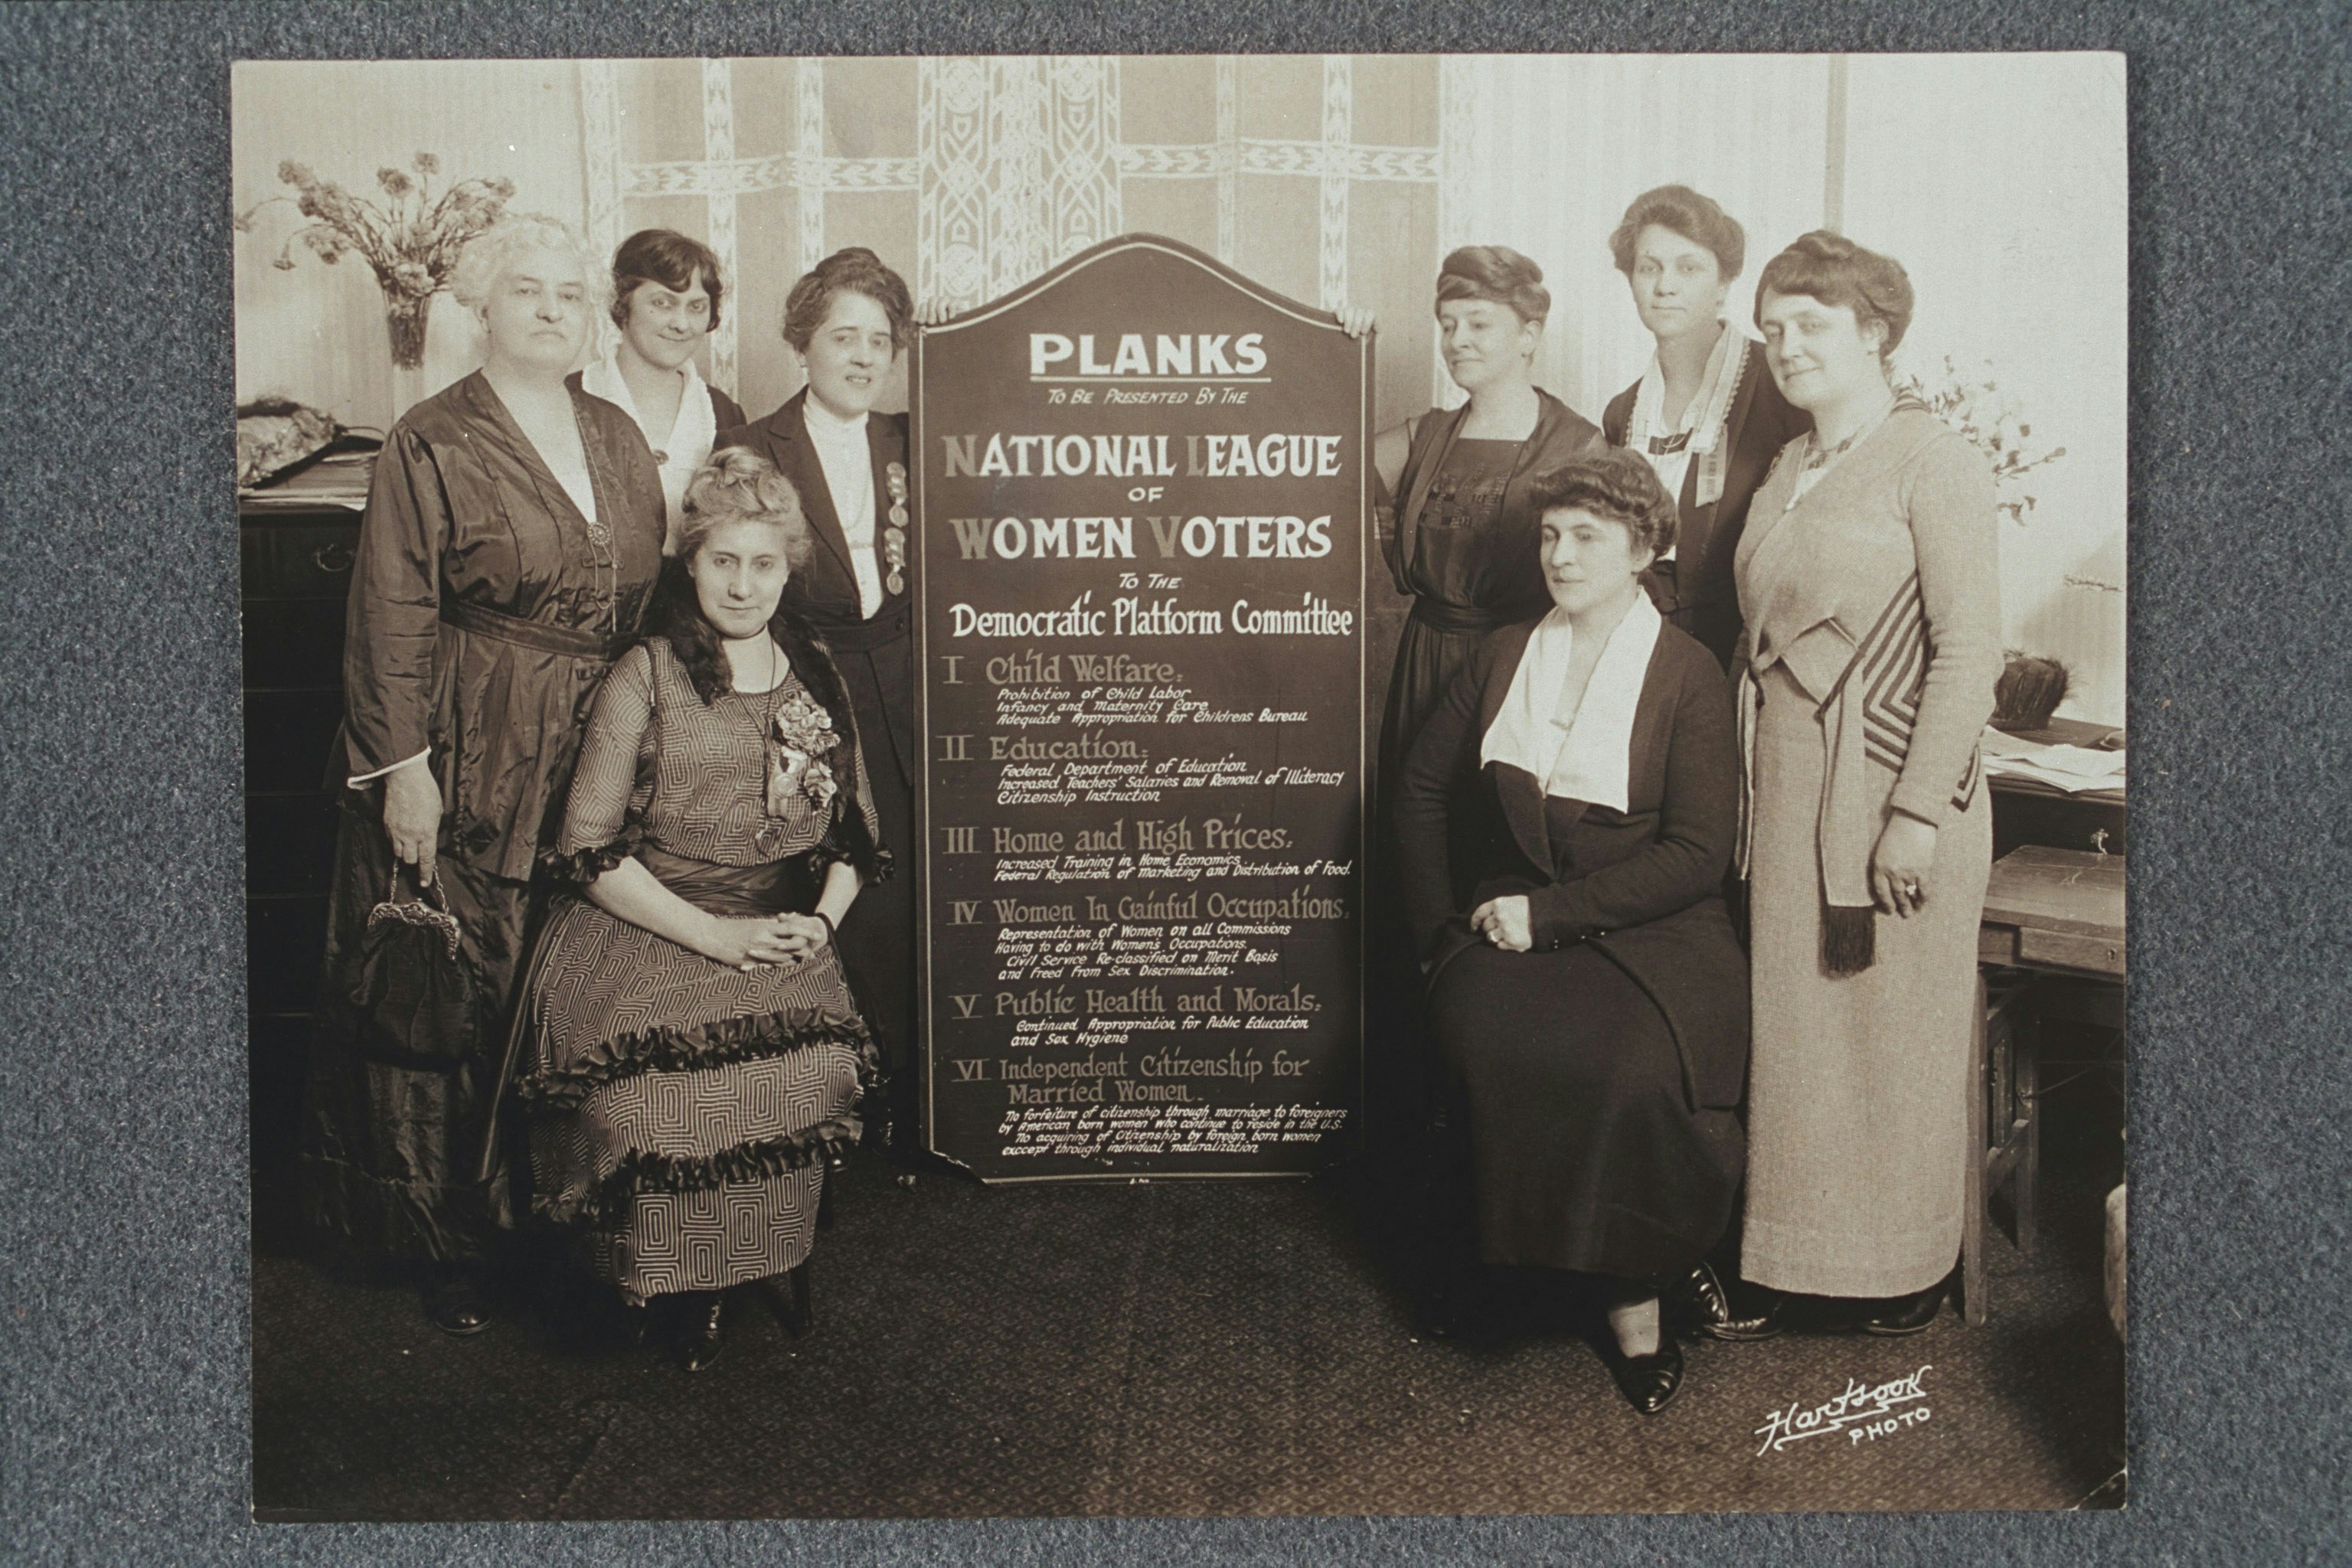 Group portrait of eight women holding a sign listing the planks to be presented by the NLWV to the Democratic Platform Committee. Pattie Ruffner Jacobs (left) and Maud Wood Park (right) are holding the sign